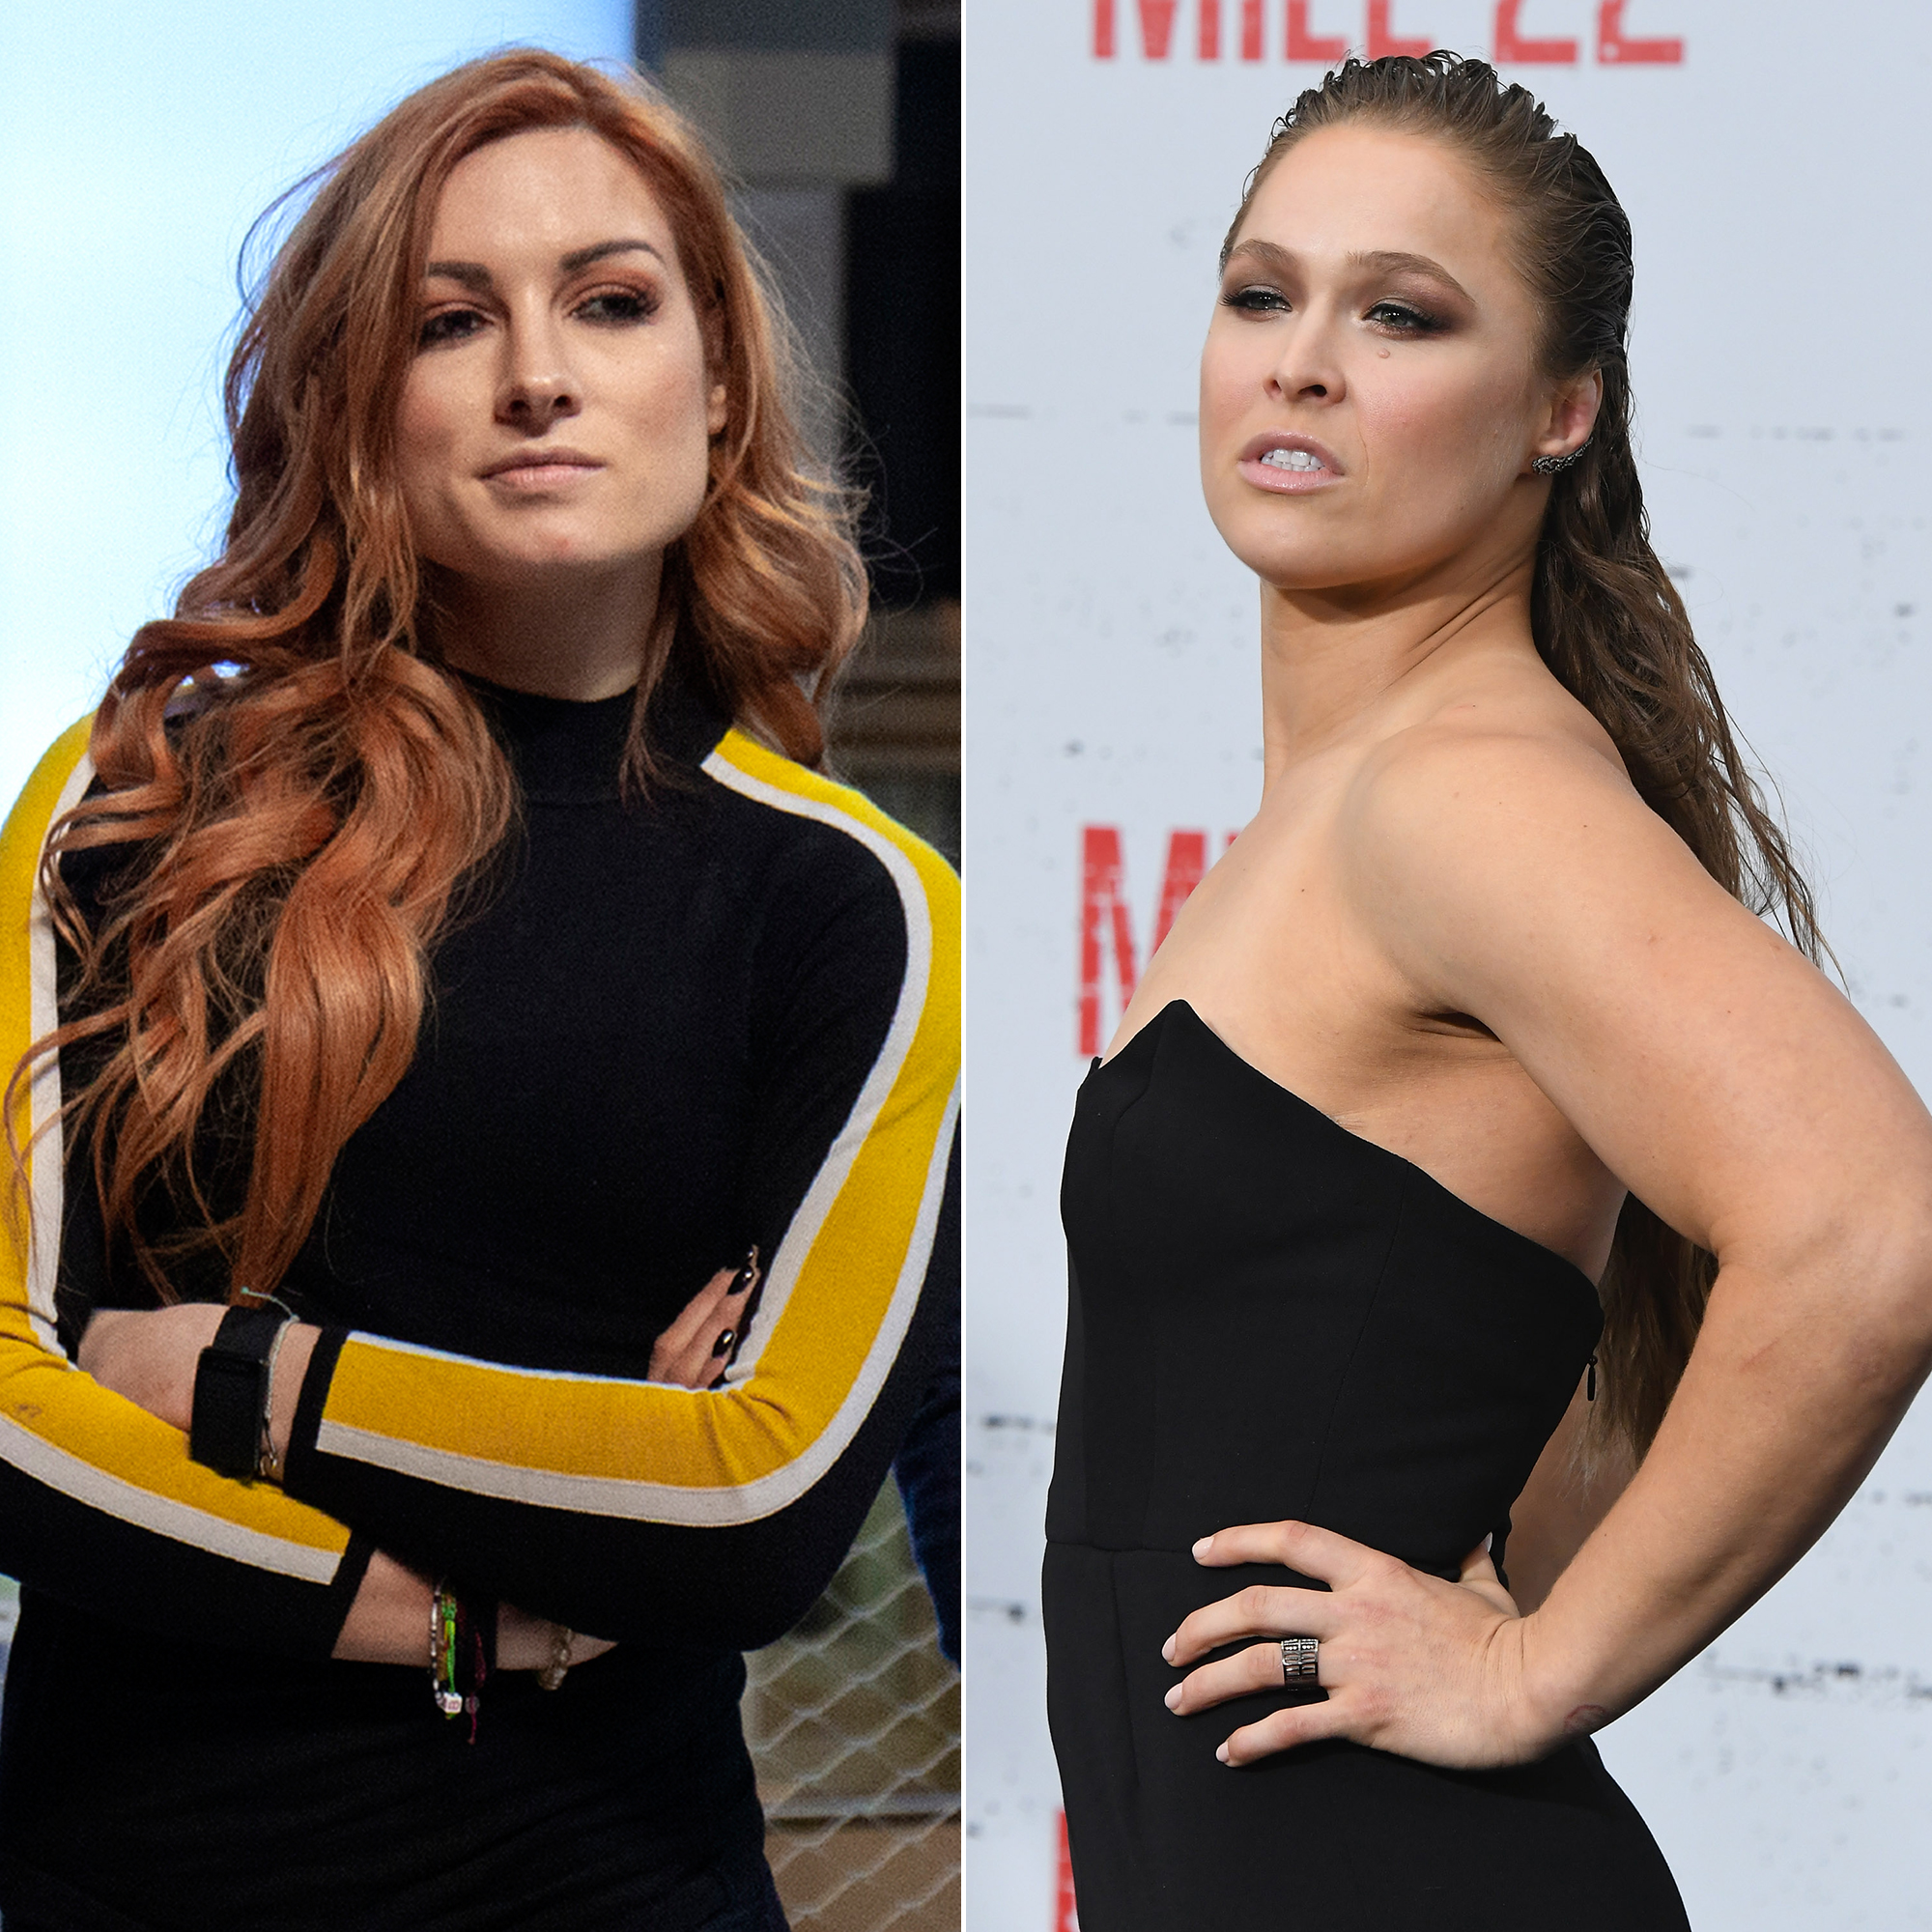 WWE's Becky Lynch Slams Ronda Rousey: 'Glad I Got to Beat Her'